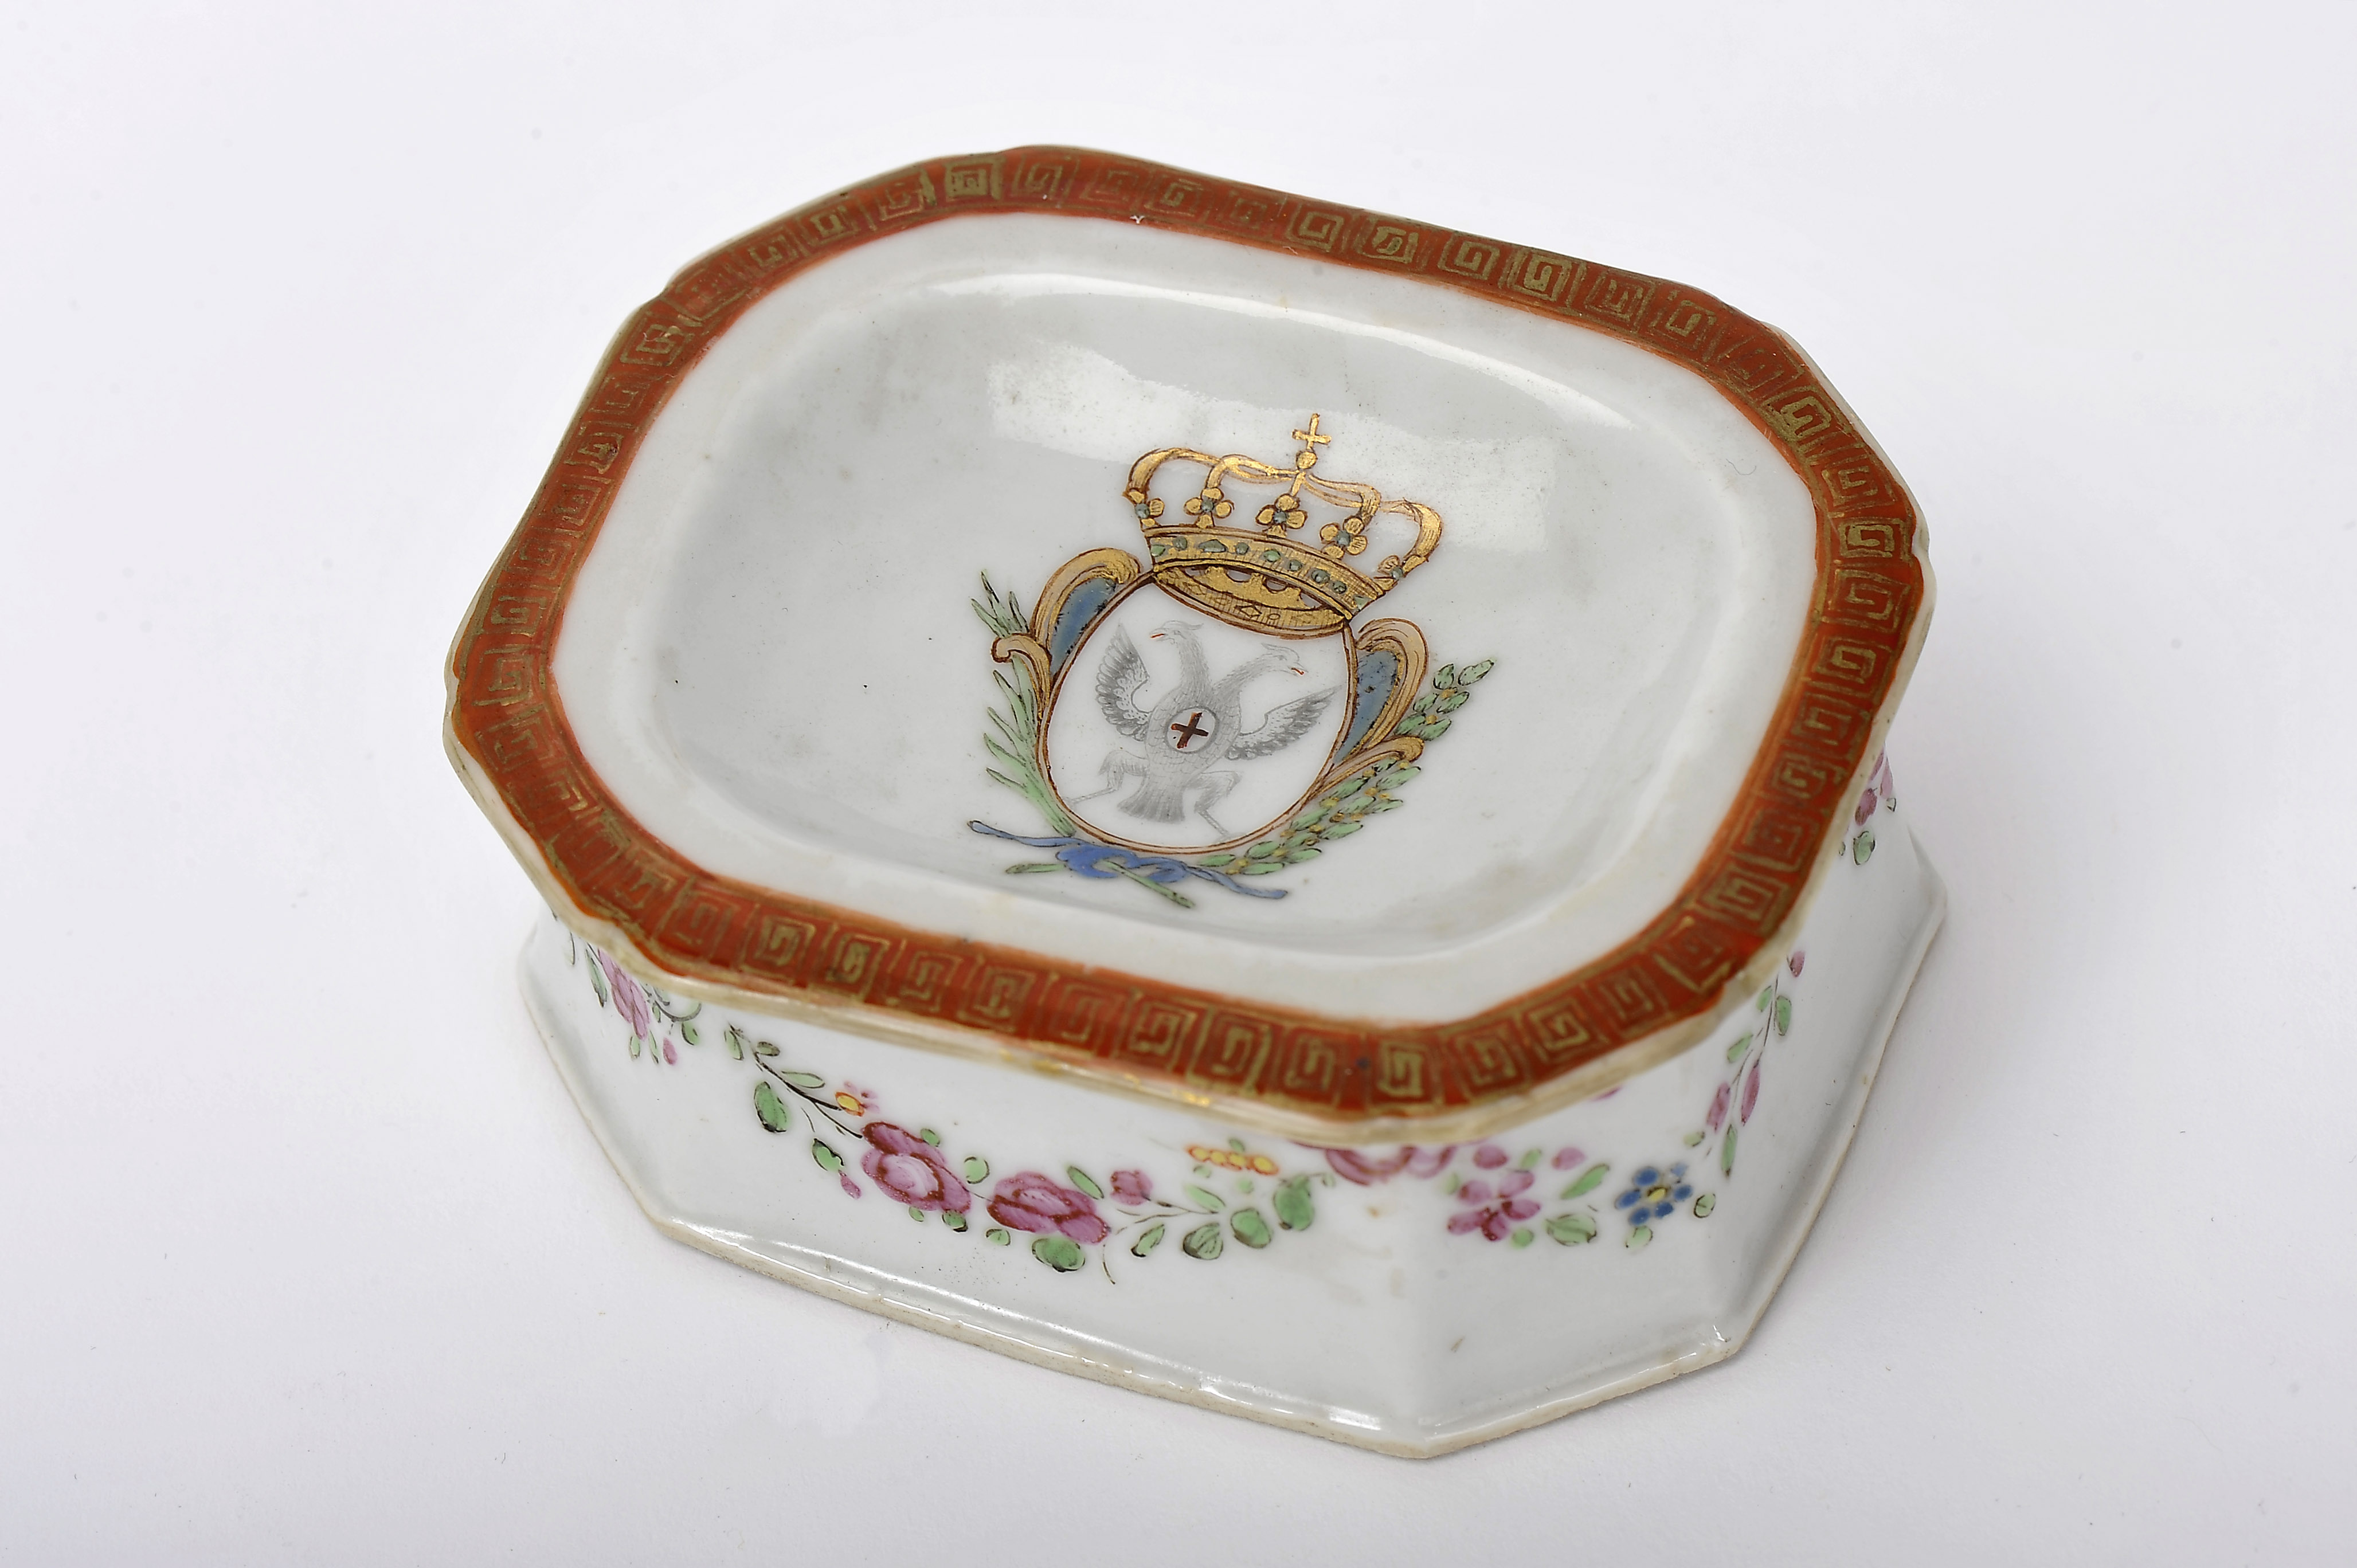 An octogonal Salt Cellar, Chinese export porcelain, gilt and polychrome decoration with the coat